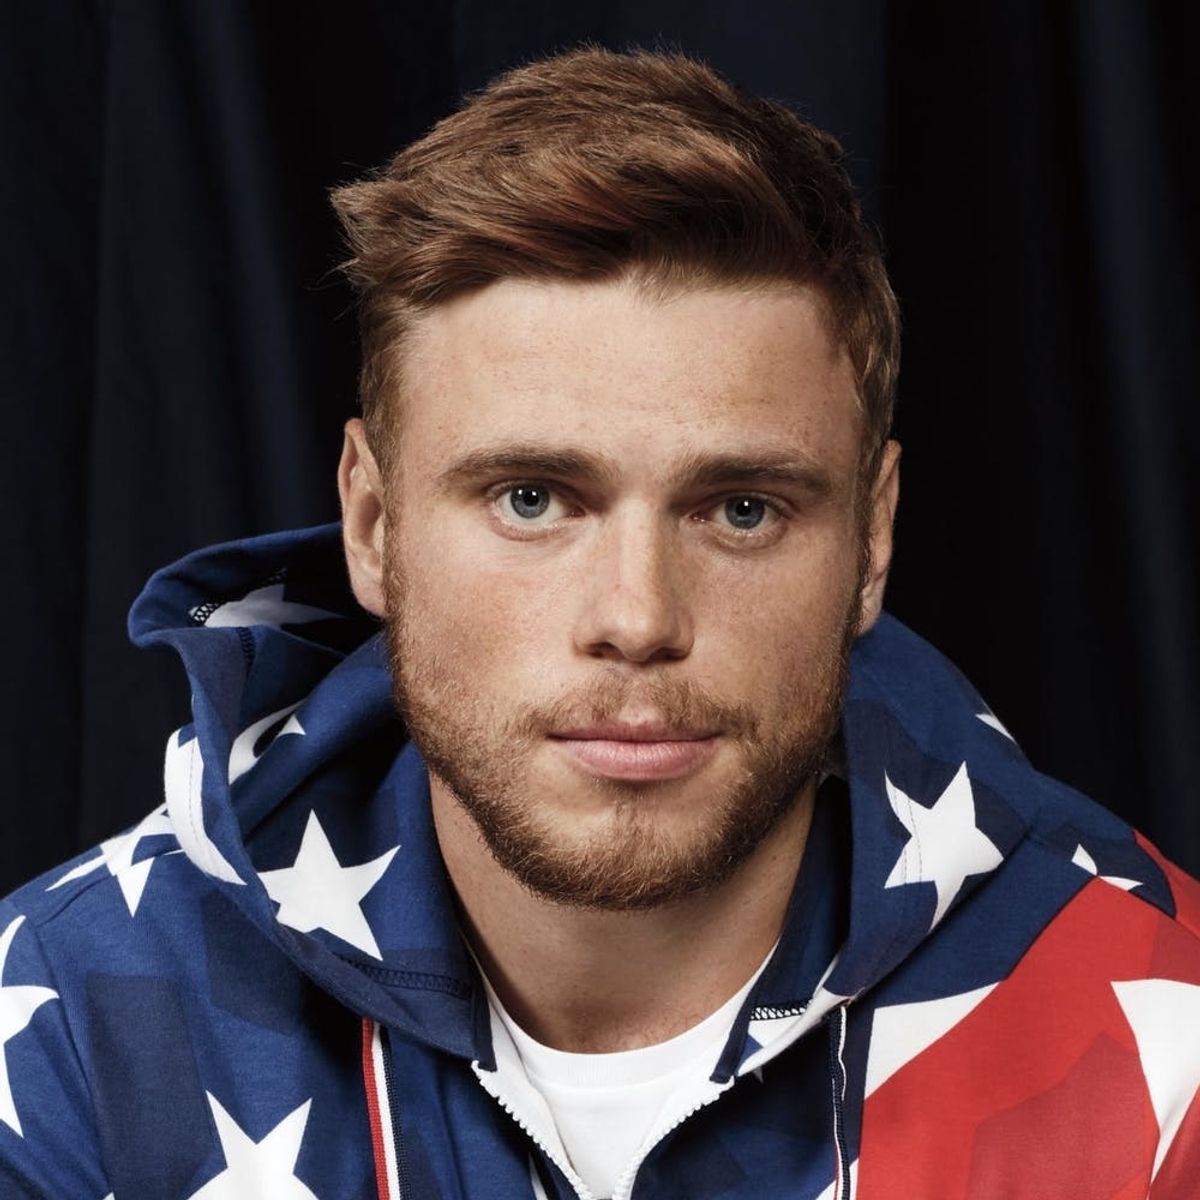 Gus Kenworthy’s 5 Tips for Taking Your Best Trip Ever